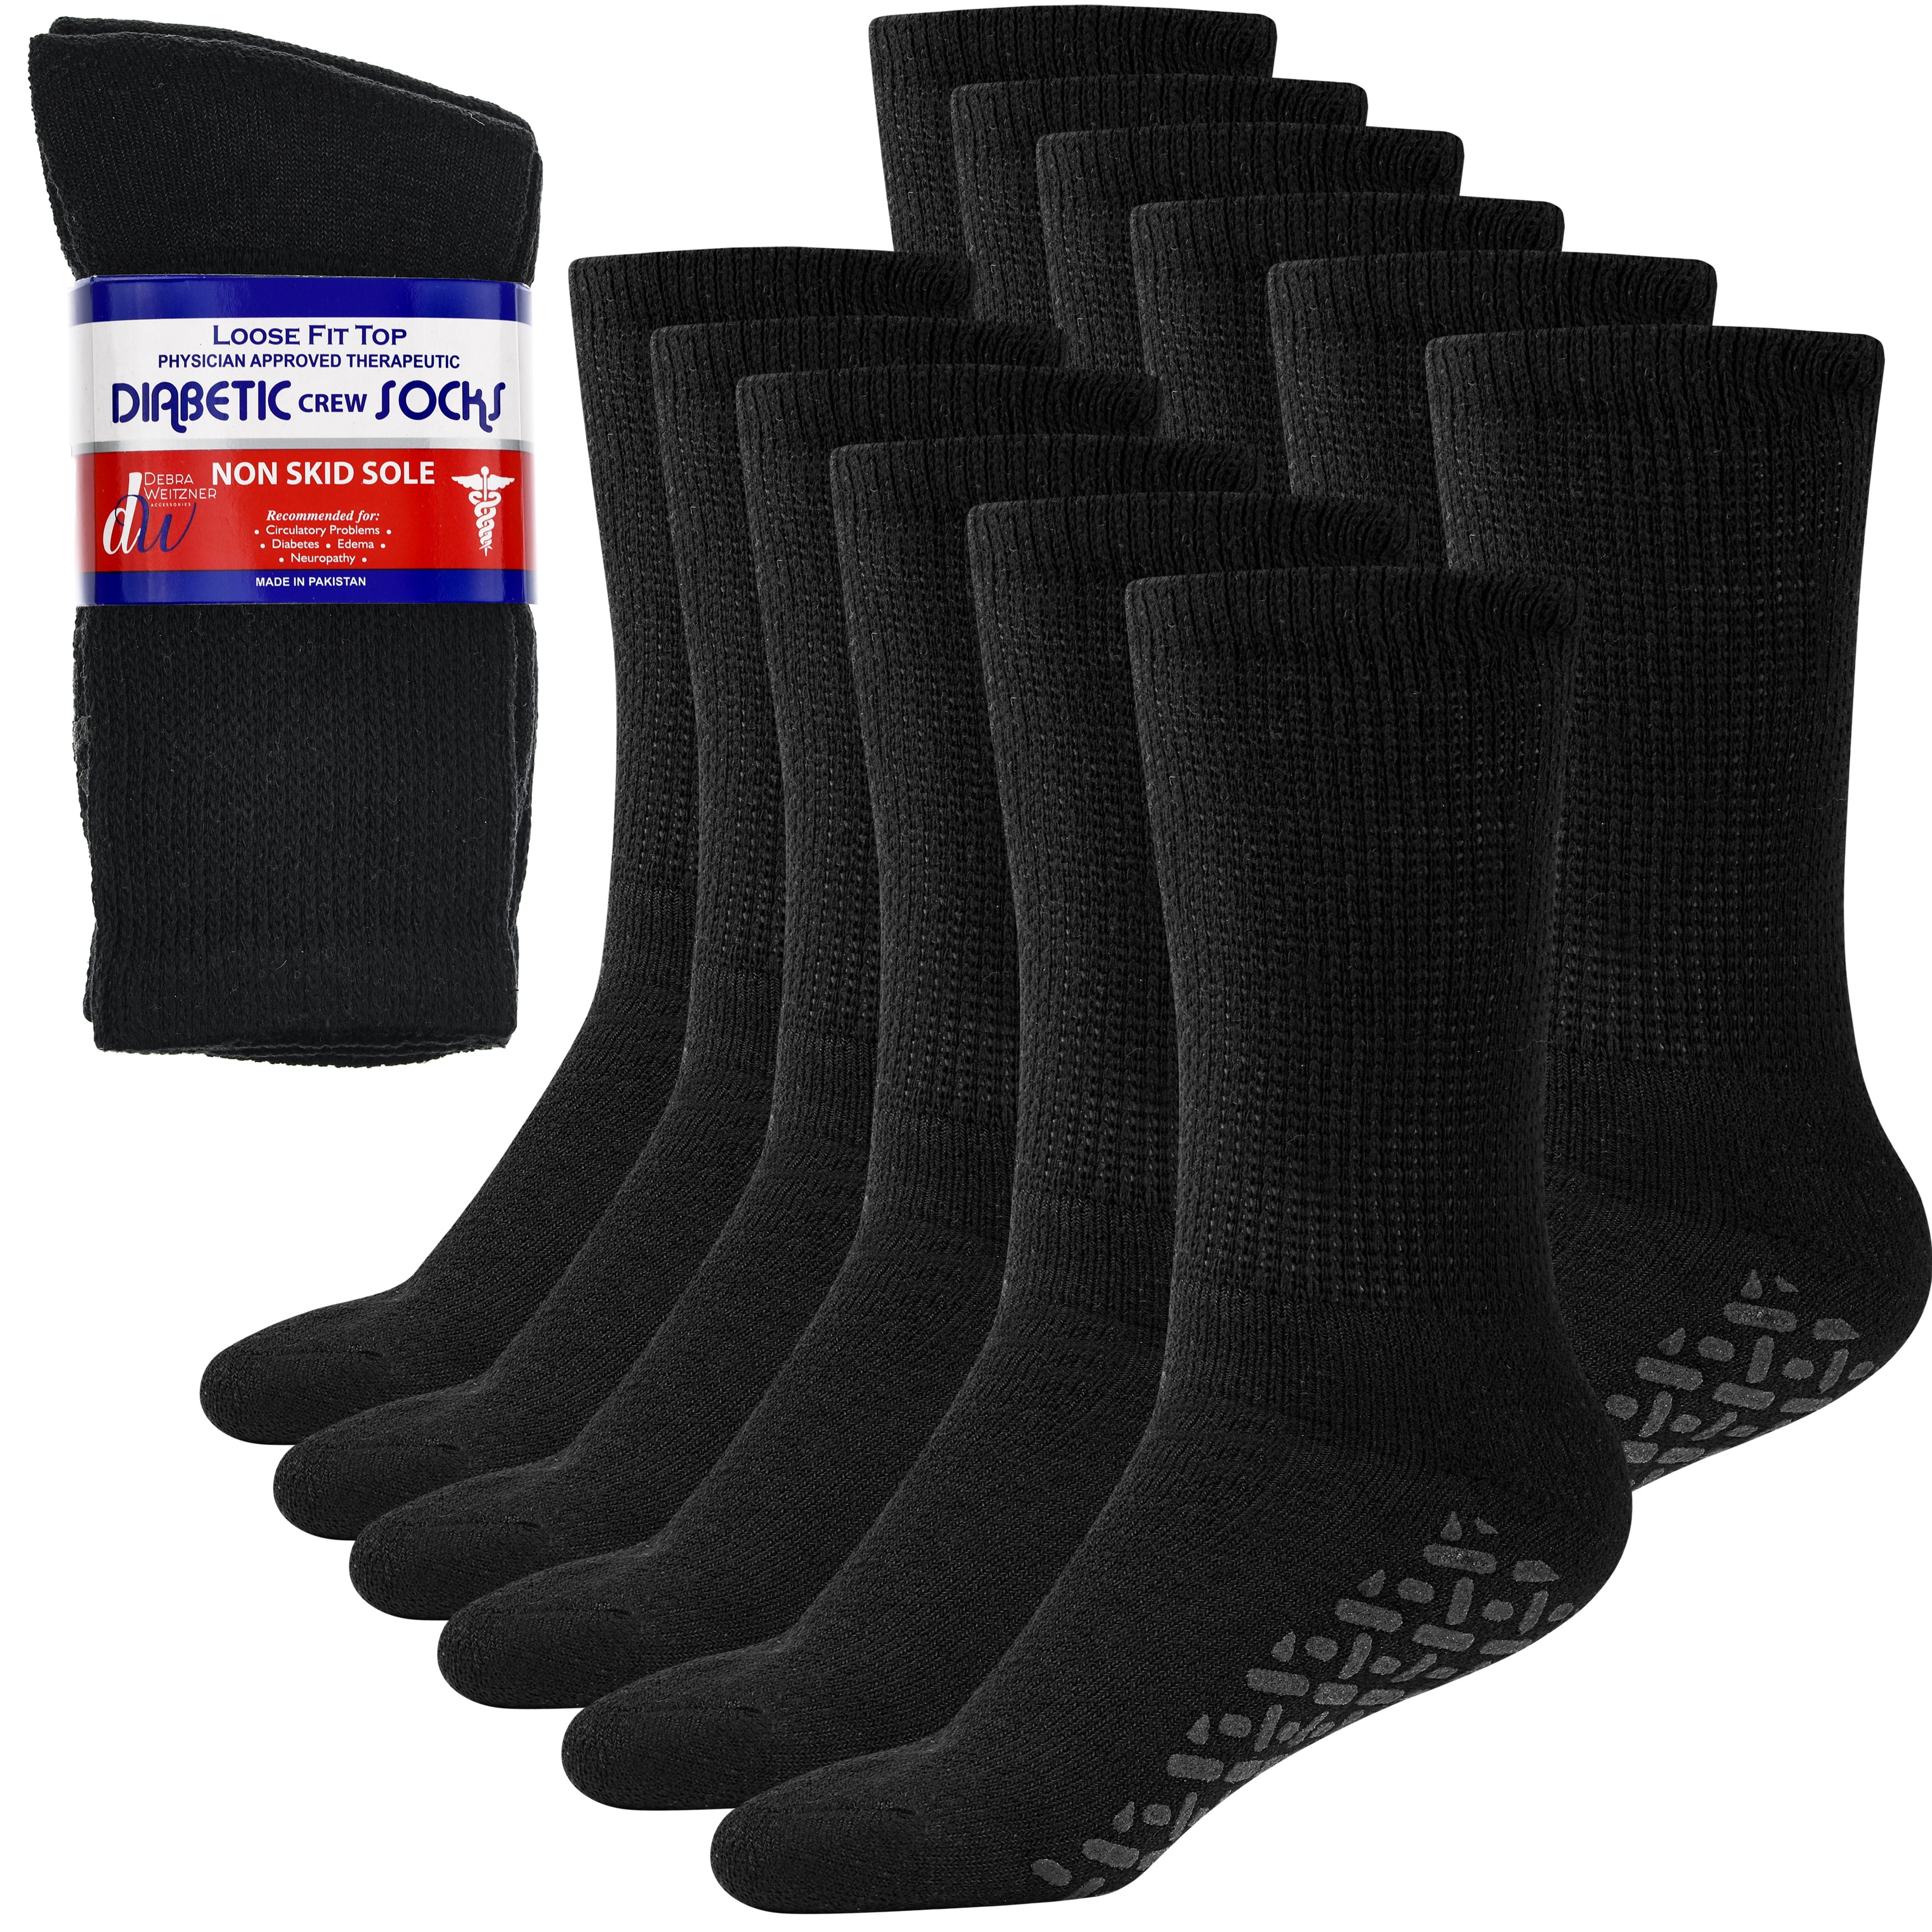 USA 12 Pair Non-Binding Top DIABETIC Mixed Colors  Size 9-11 Crew Socks,New 